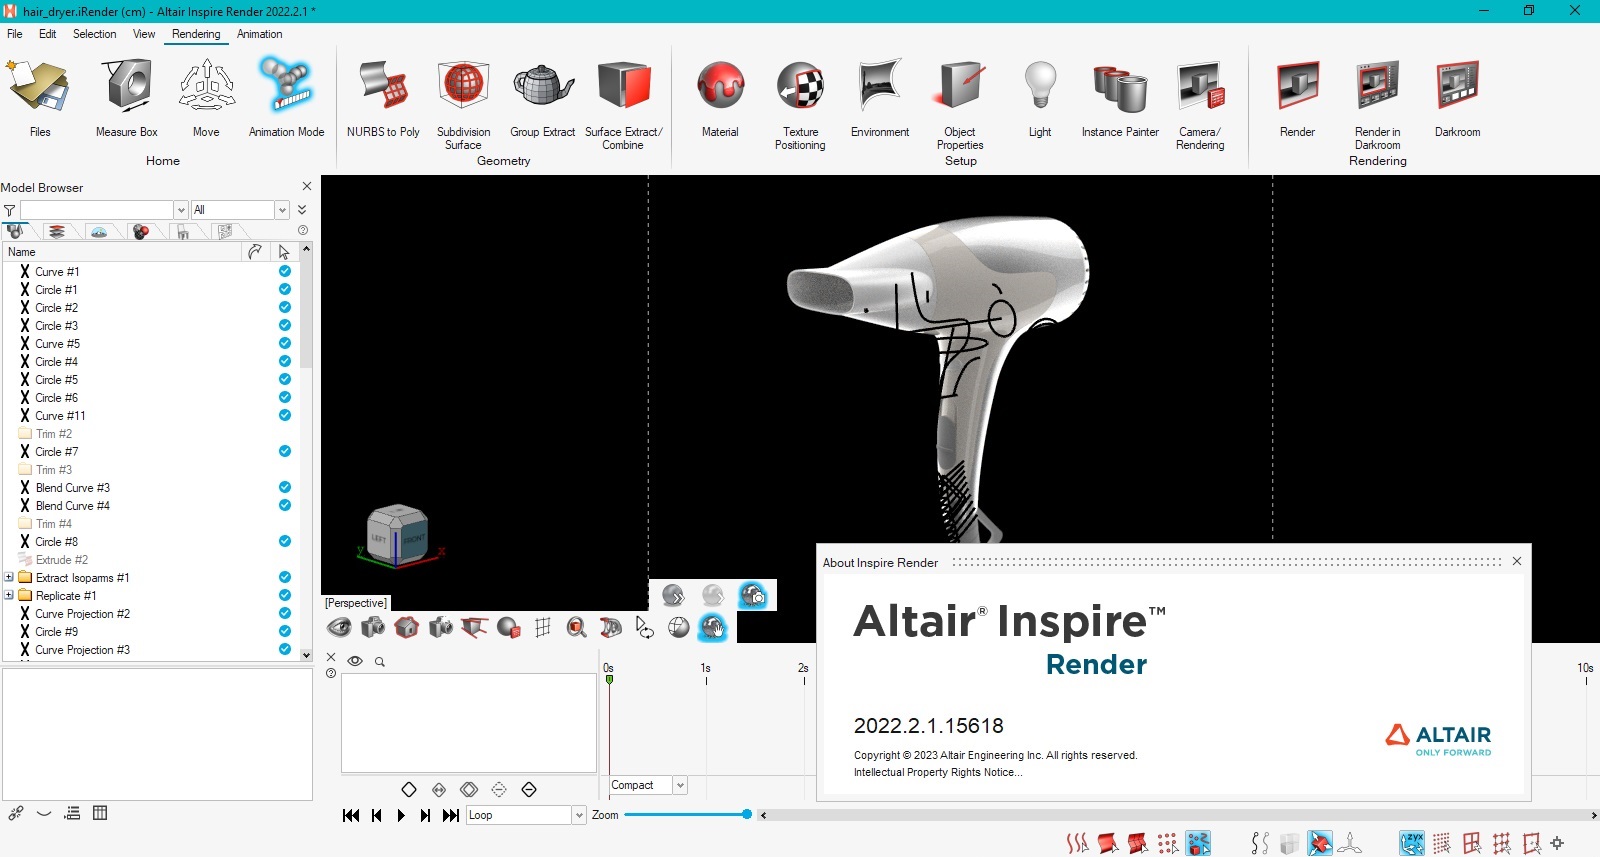 Working with Altair Inspire Render 2022.2.1 full license